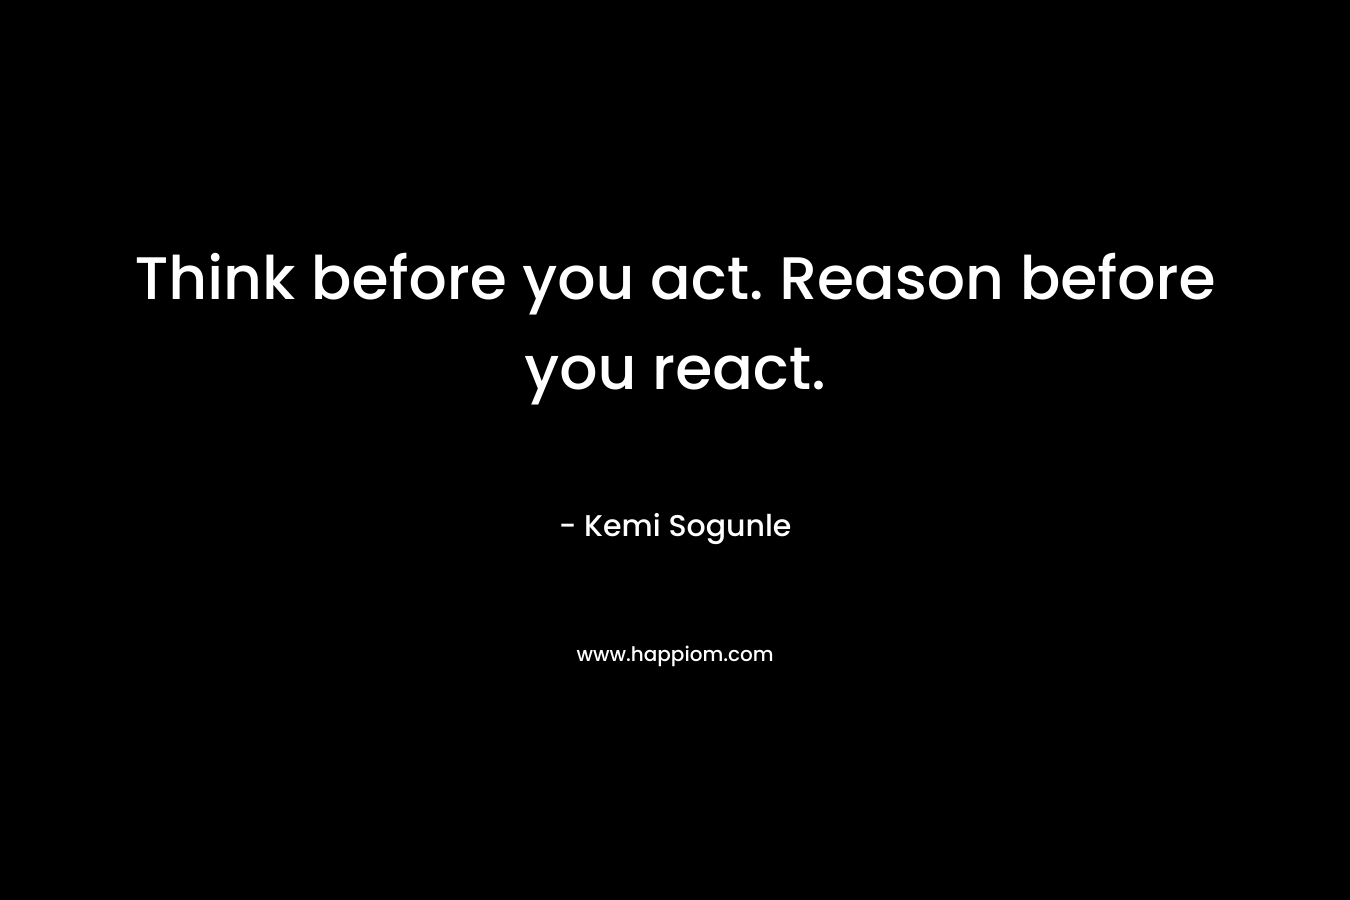 Think before you act. Reason before you react.